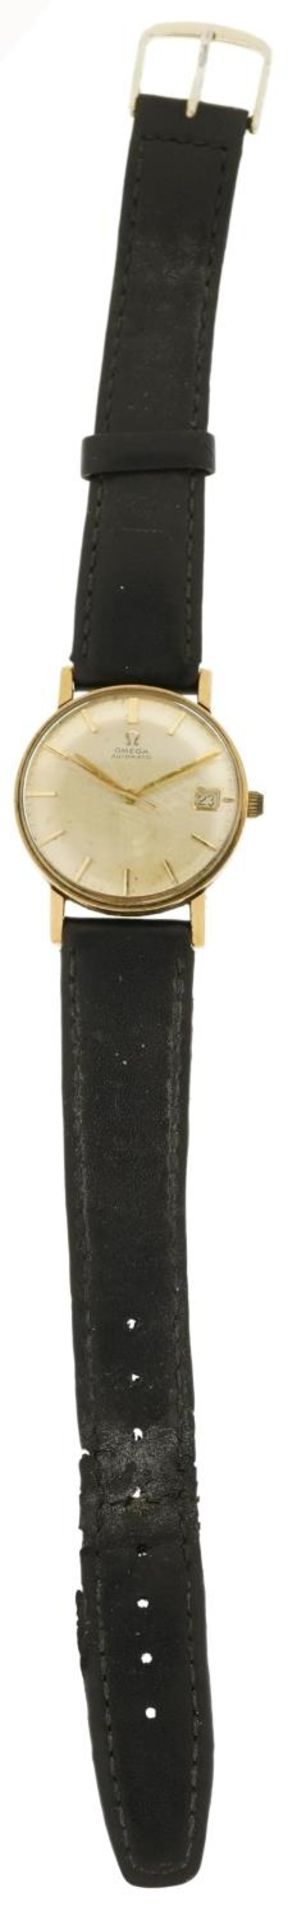 Omega, gentlemen's 9ct gold automatic wristwatch with date aperture, the movement numbered 19664649, - Image 2 of 5